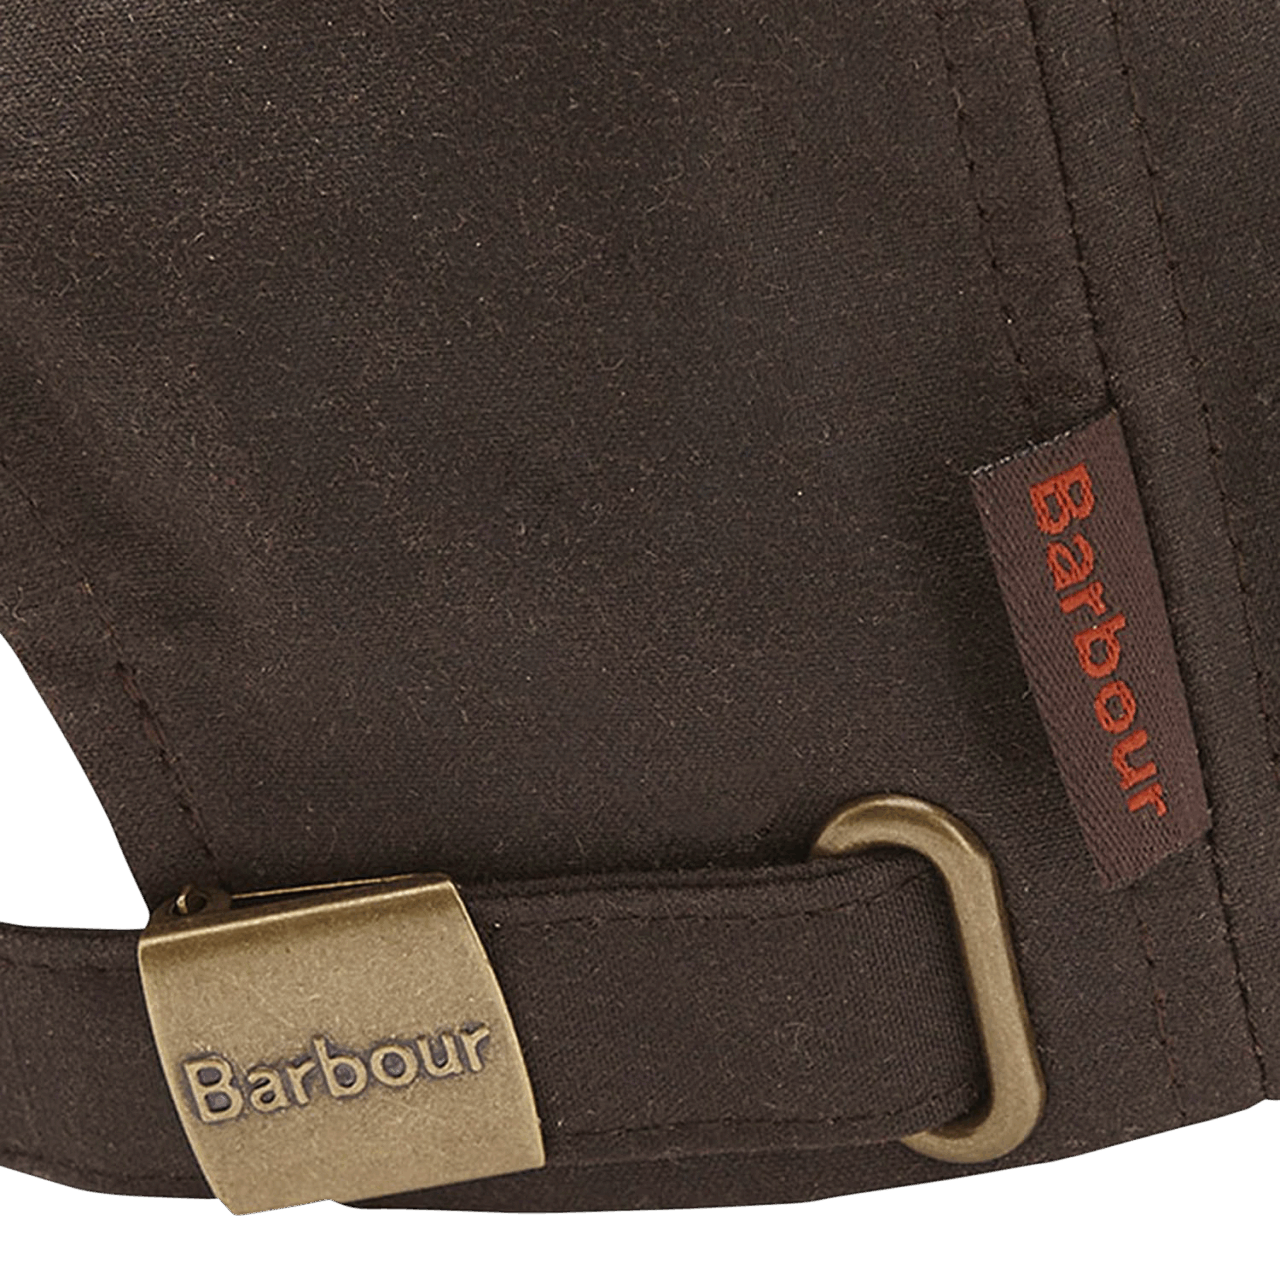 Barbour Waxed Sports Cap - rustic